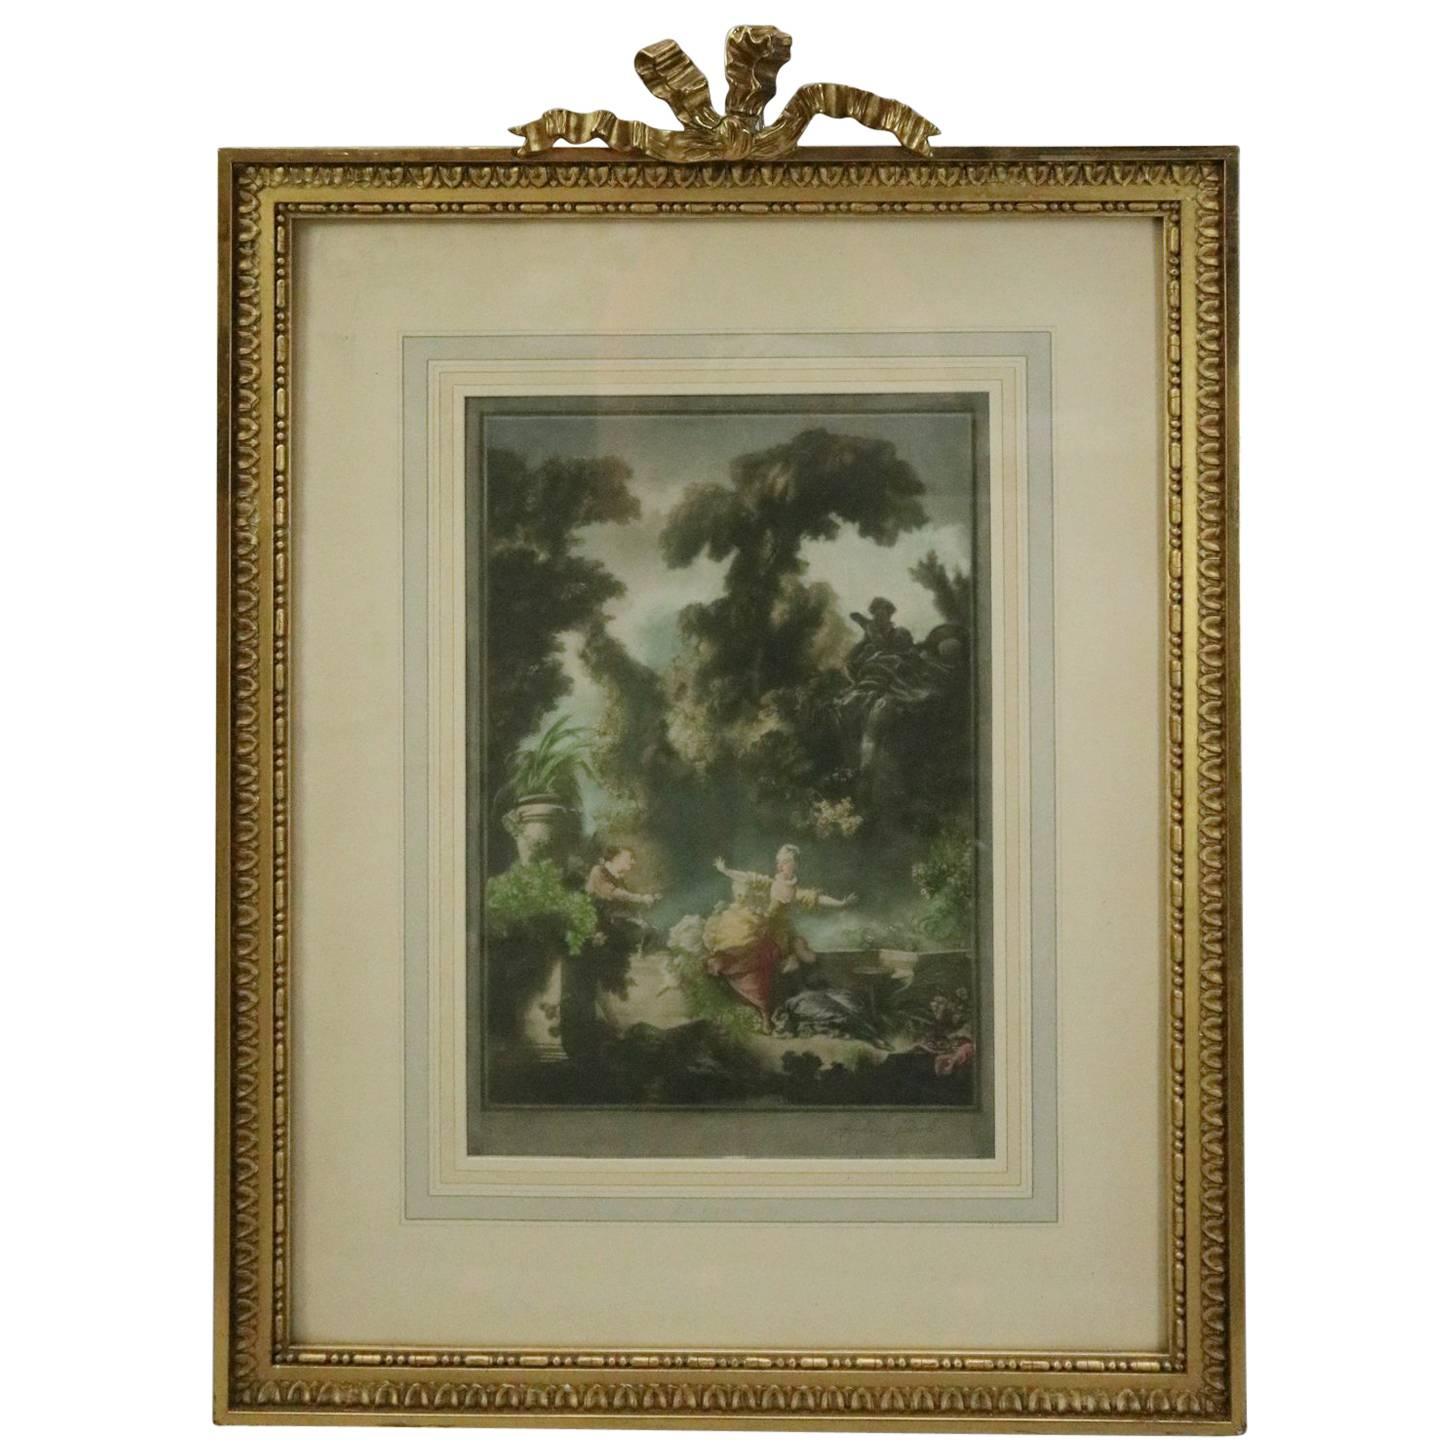 Antique English Print after the French Painting "La Poursuite" by Fragonard